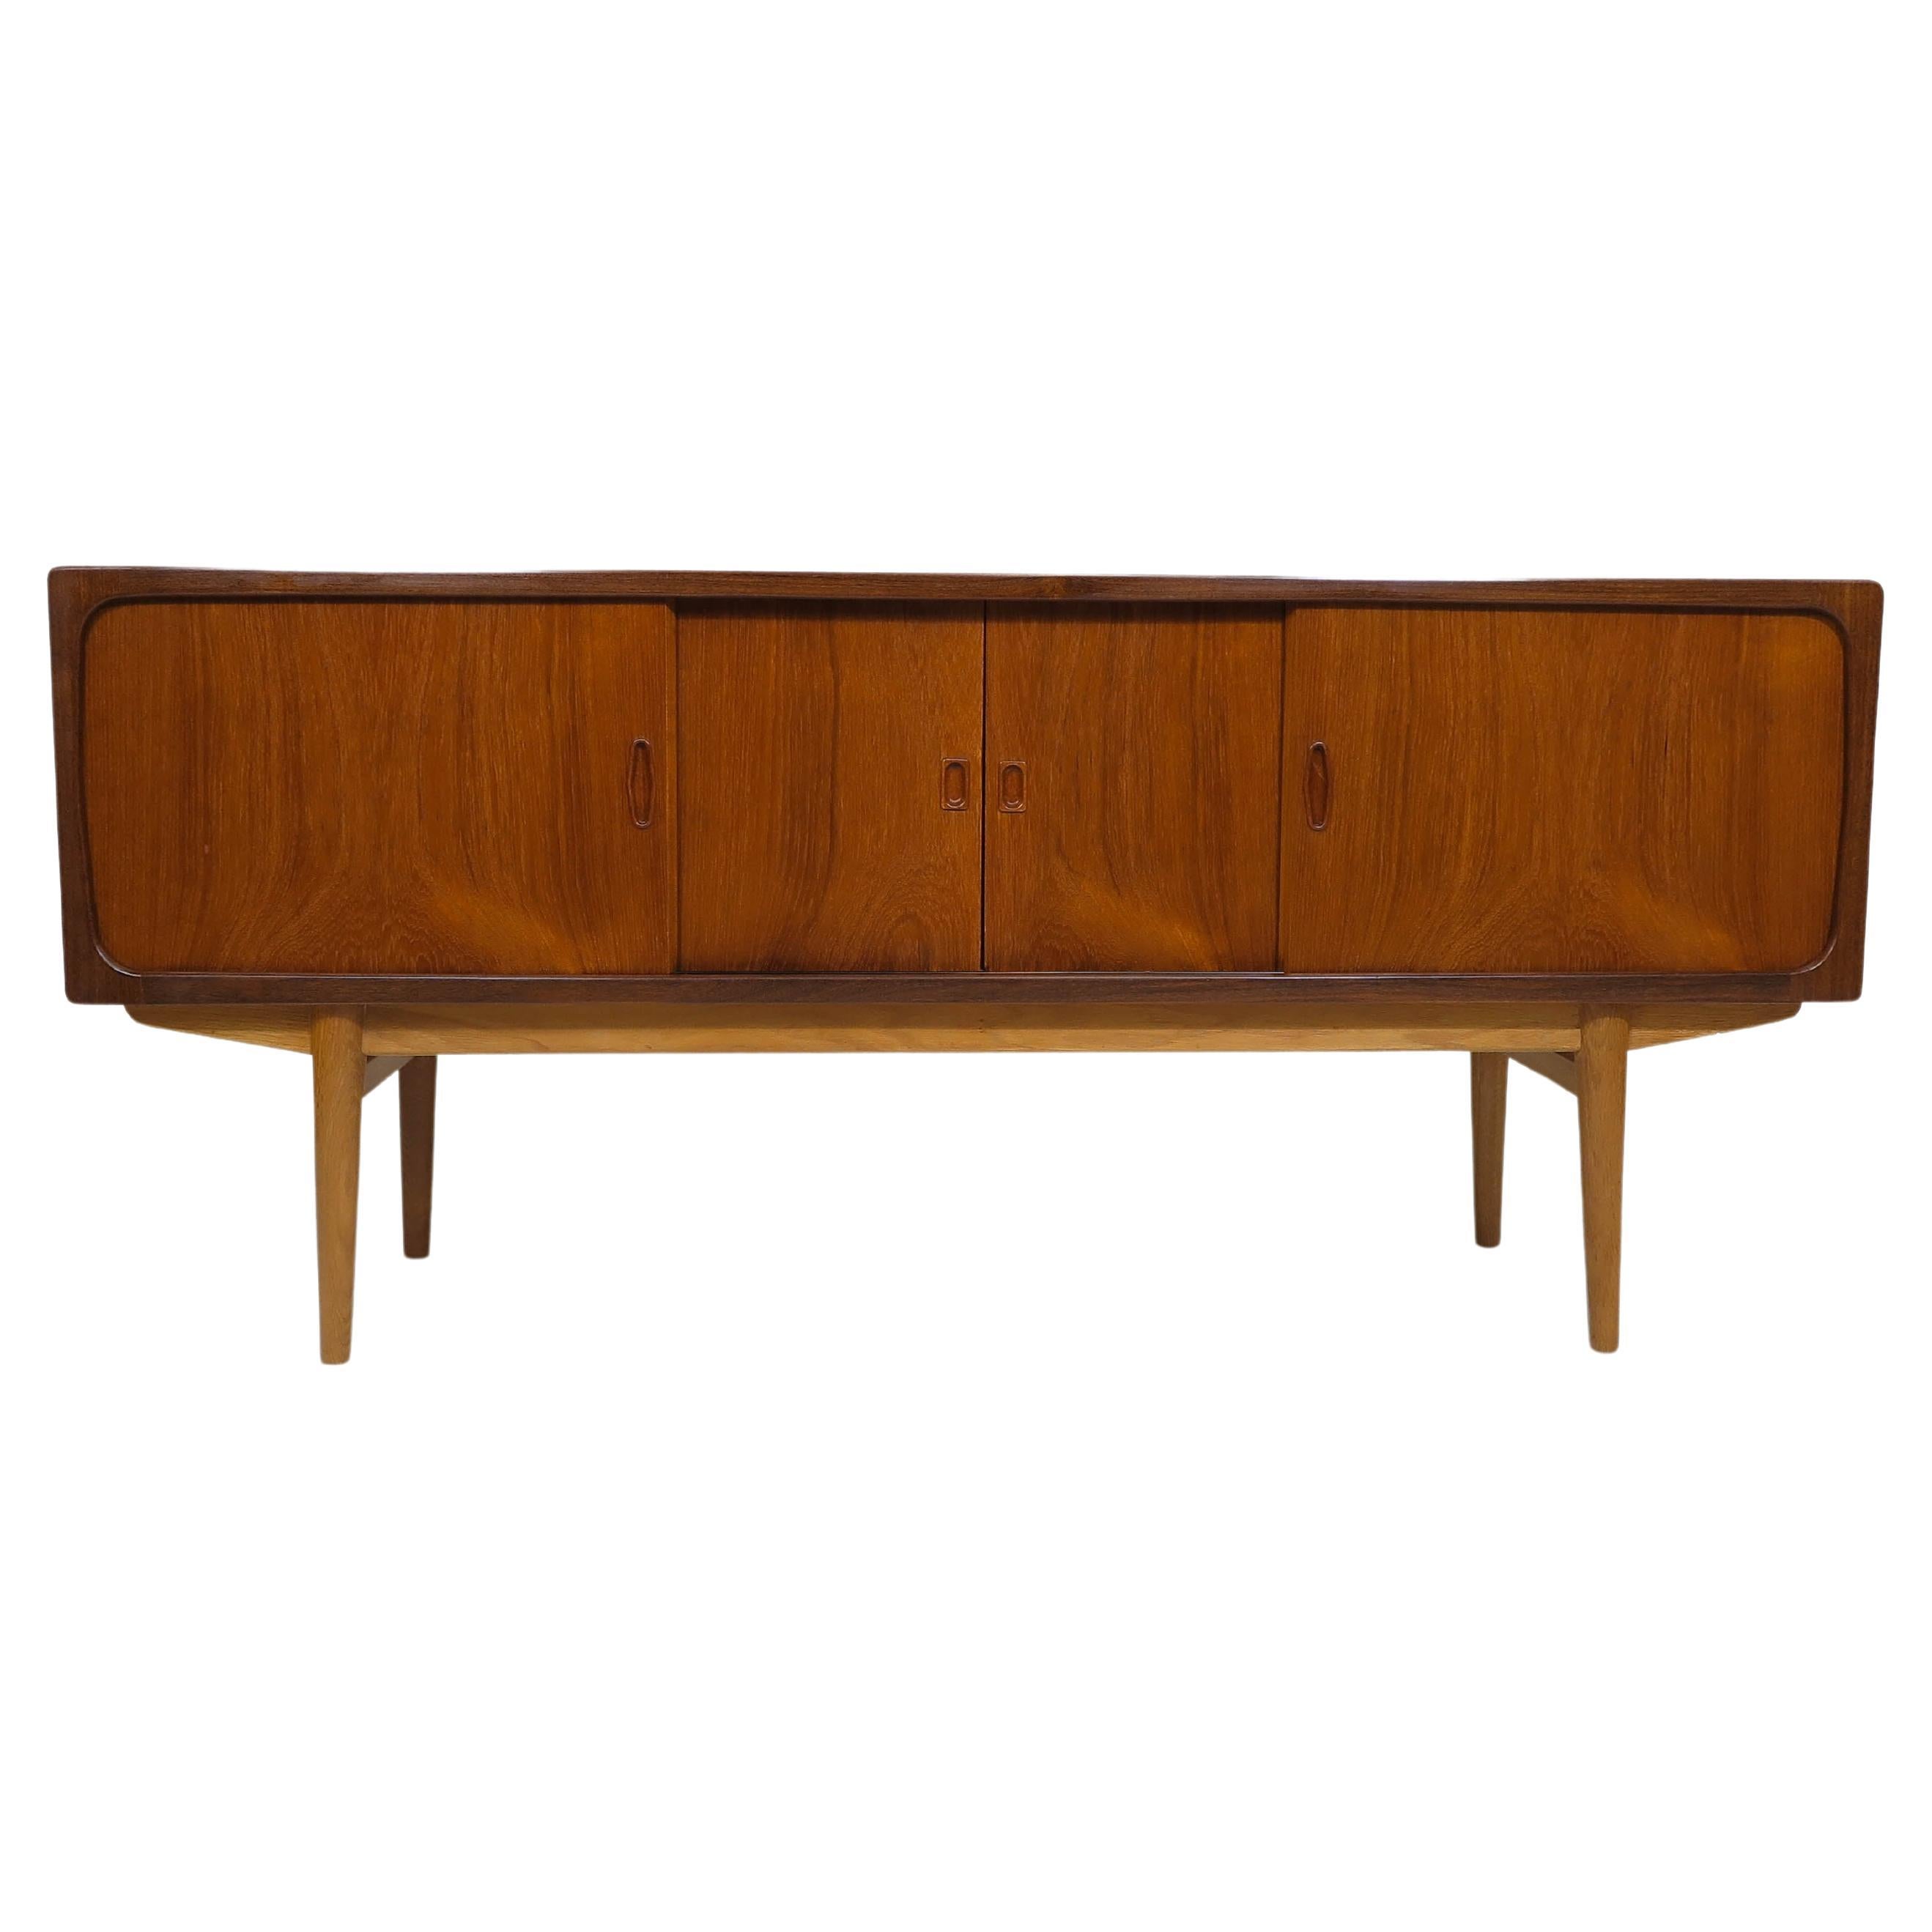 Danish Teak Credenza with Center Mirrored Bar For Sale